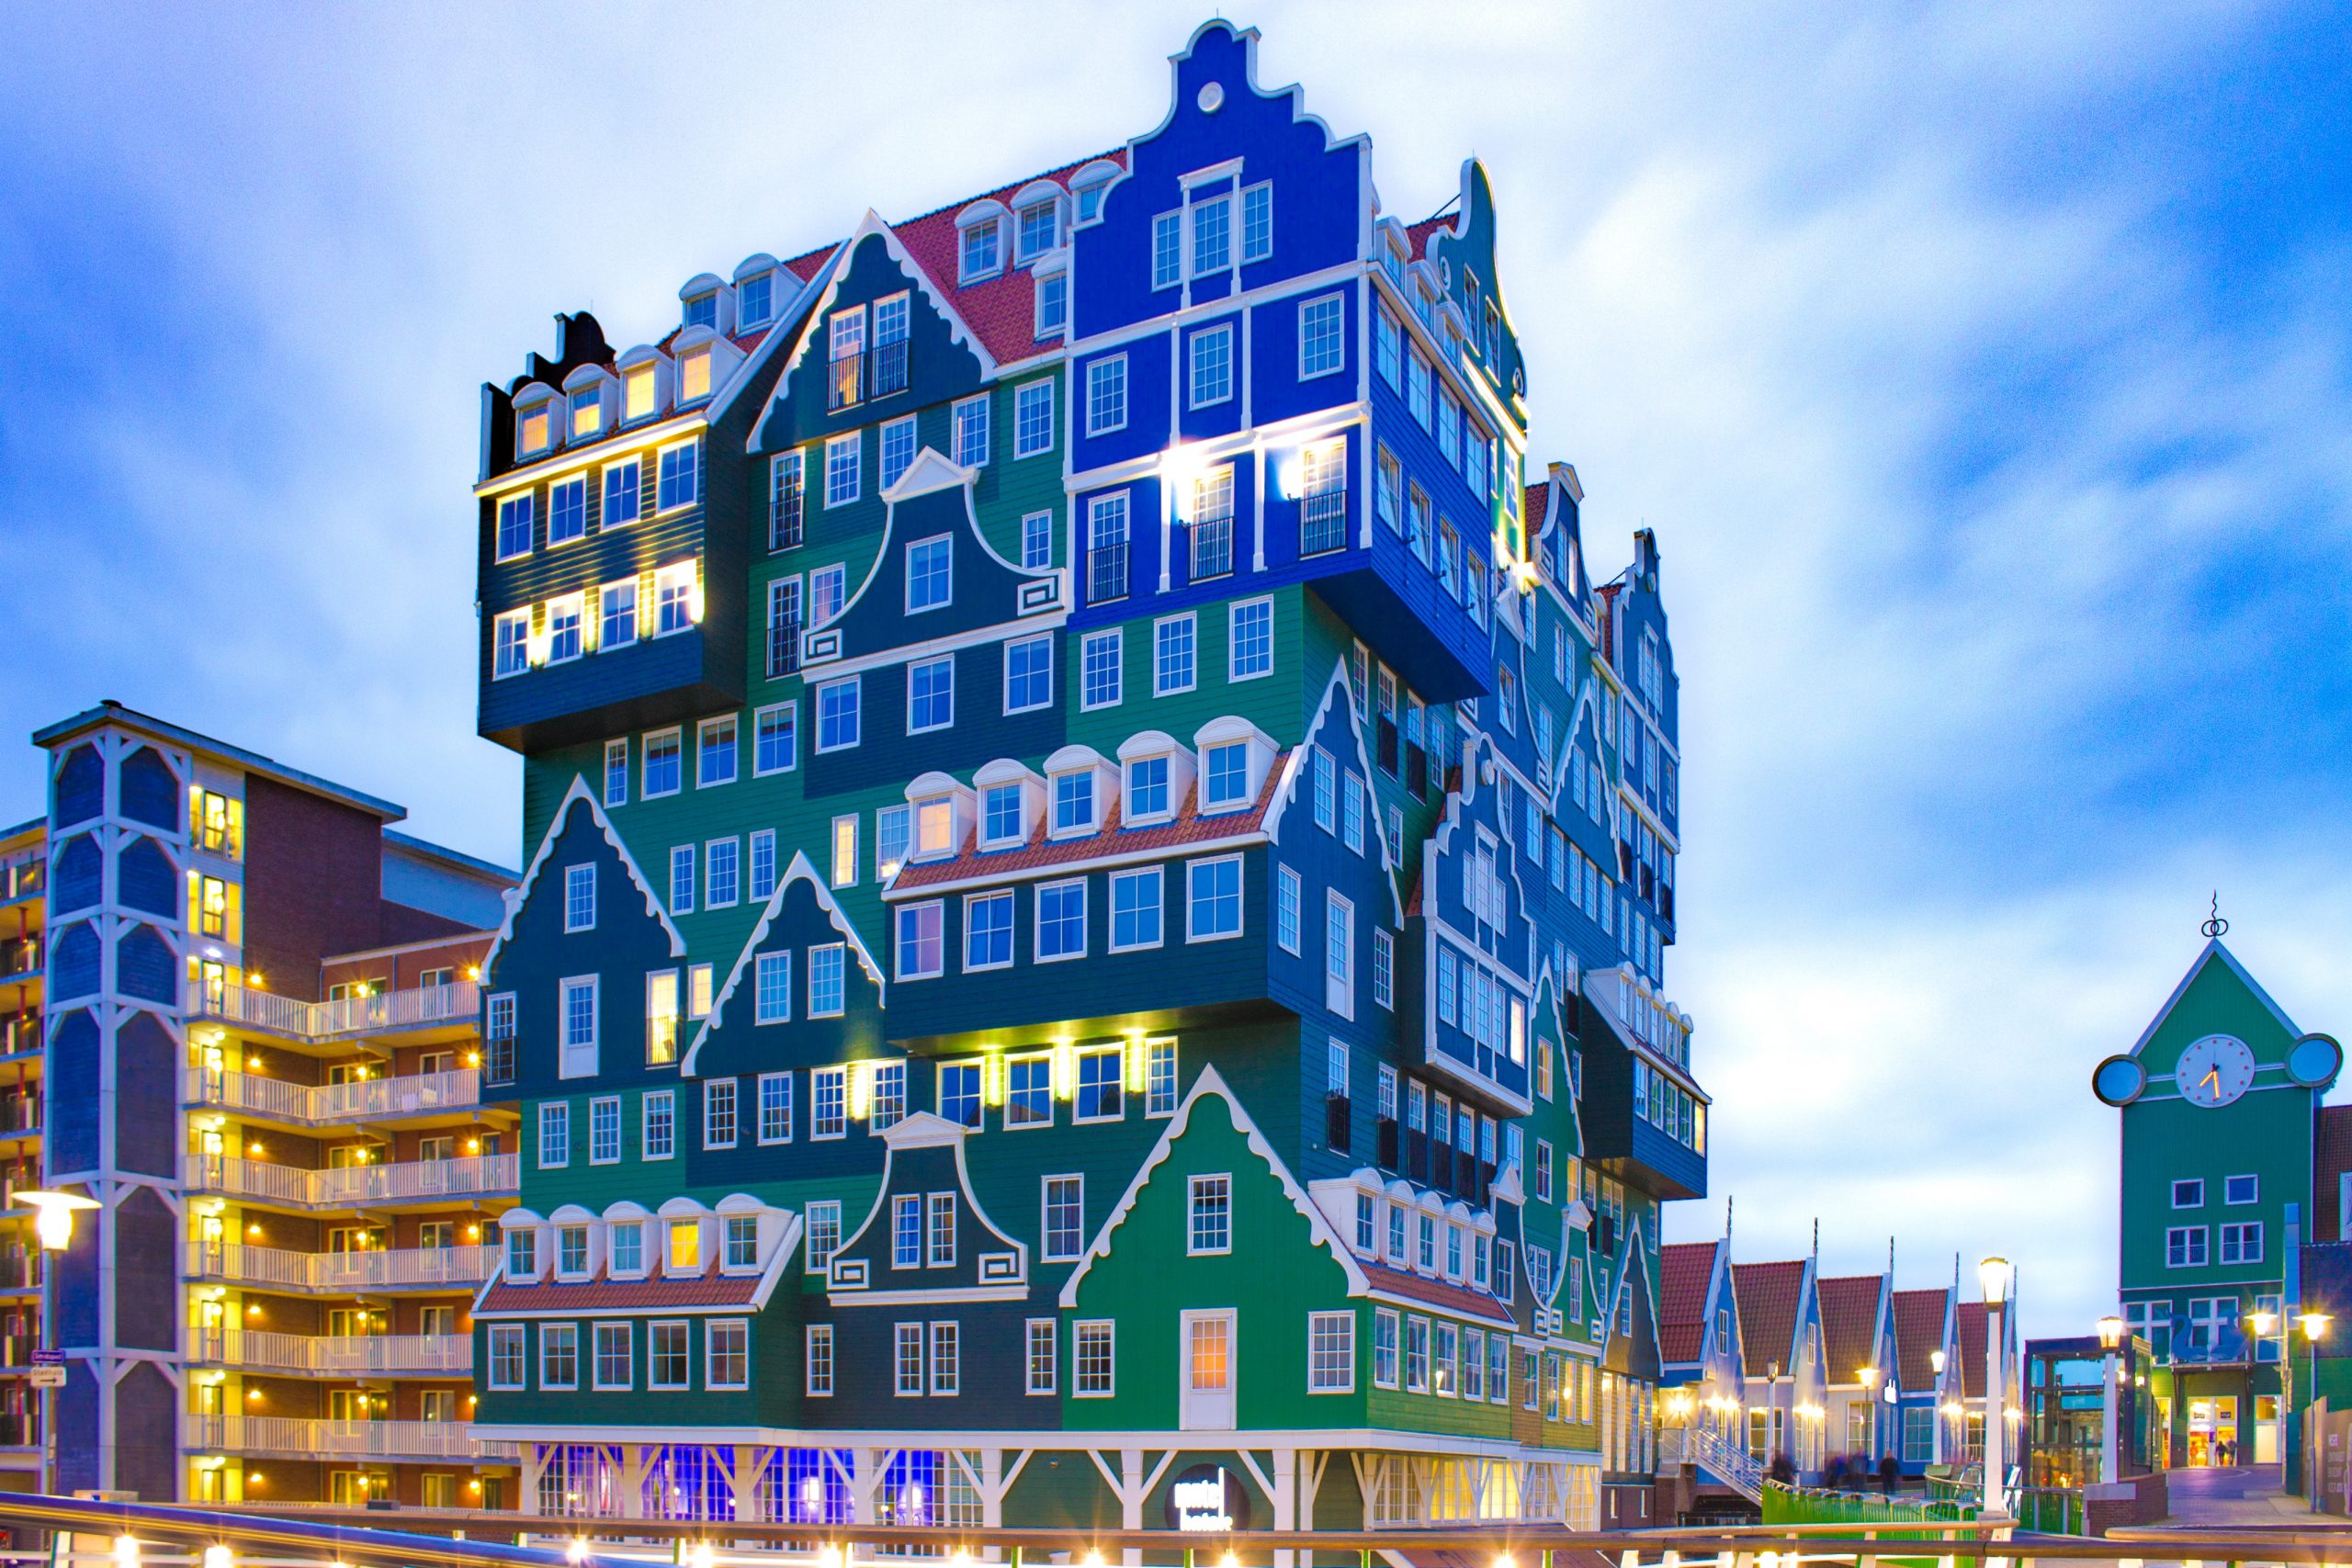 Amsterdam design and architecture at night submission support passport